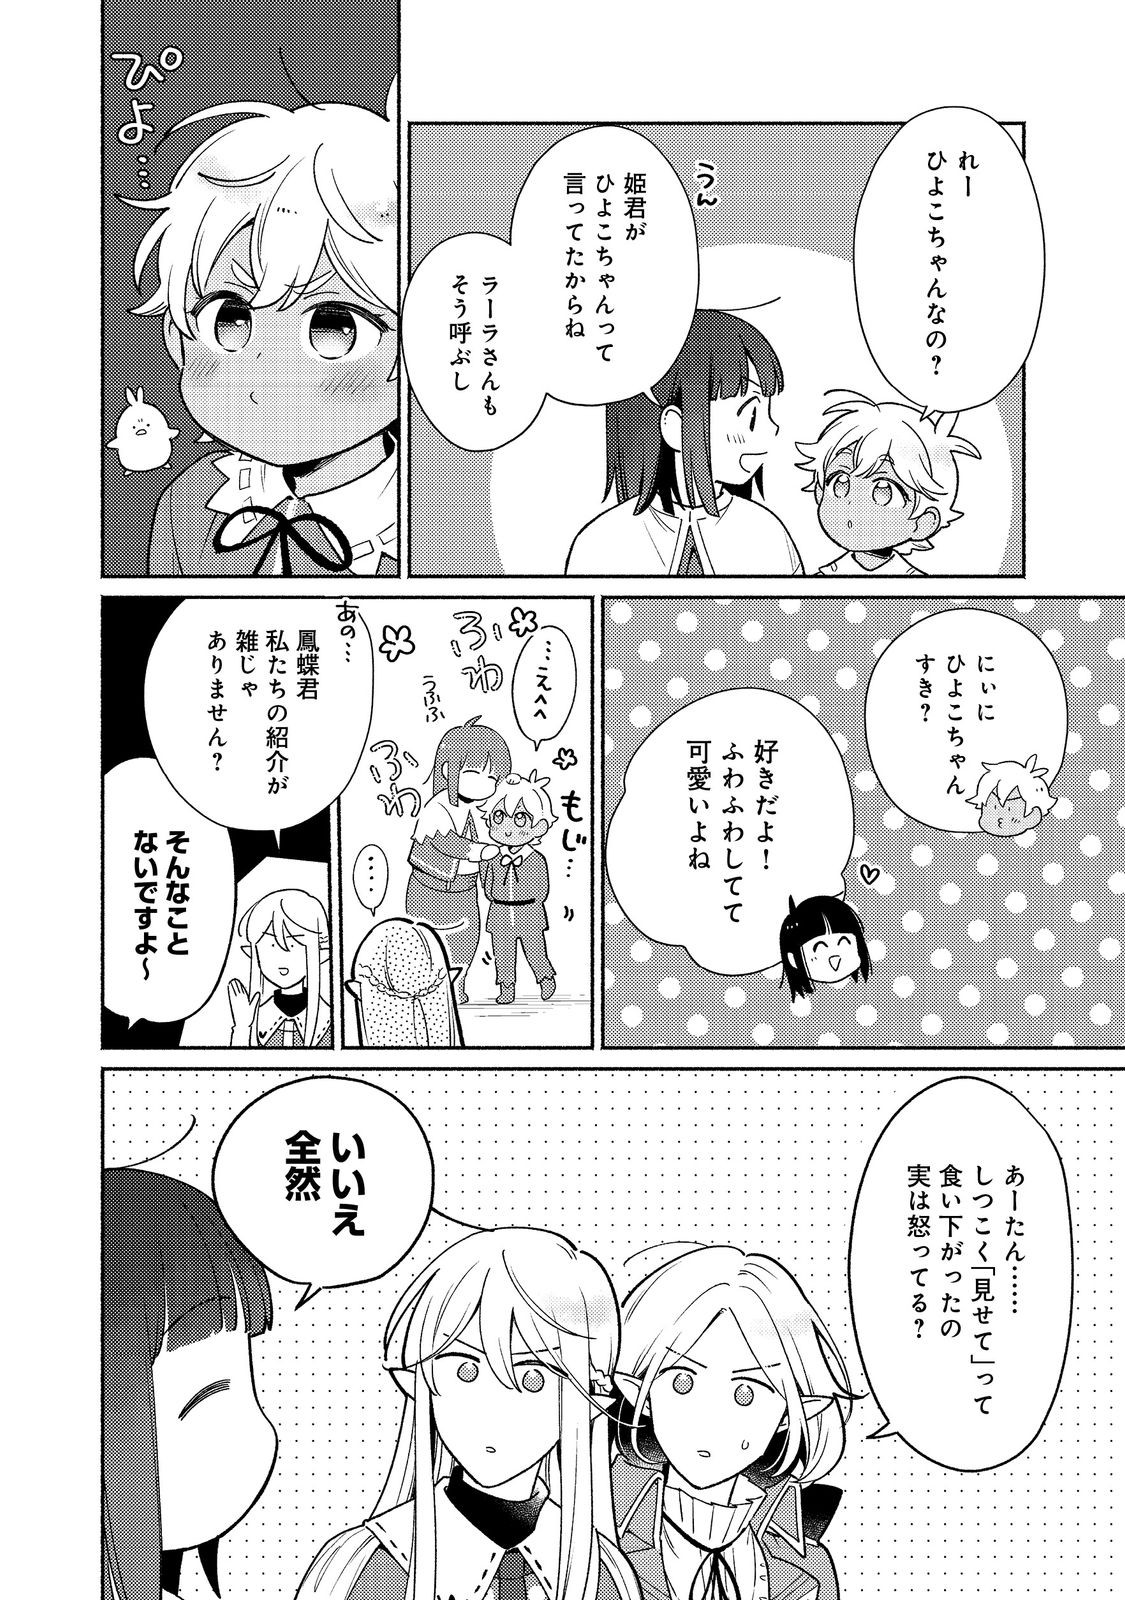 I’m the White Pig Nobleman 第21.1話 - Page 6